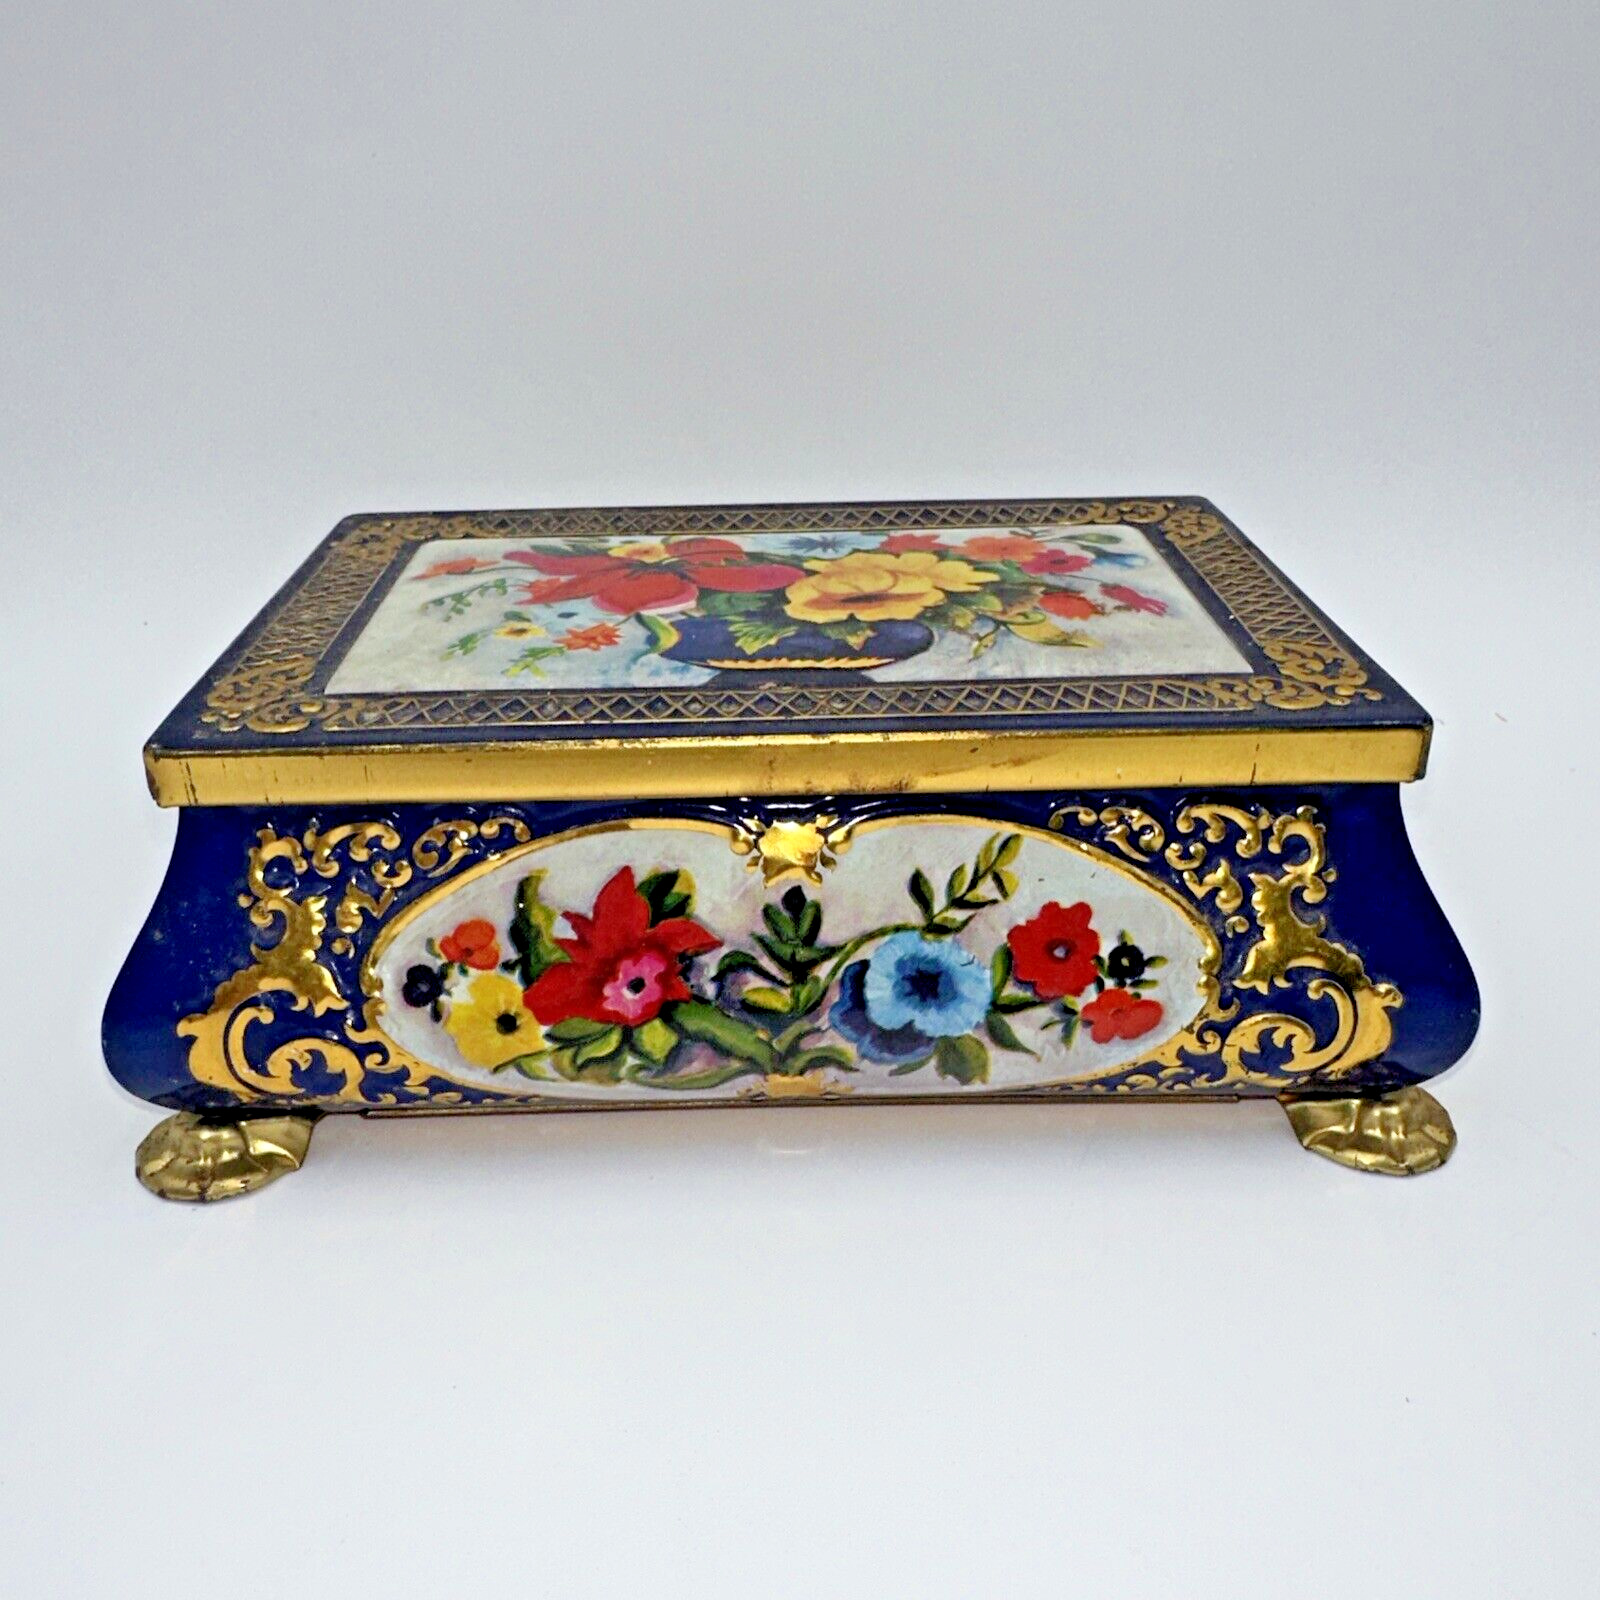 Vintage Blue And Gold Metal Footed Floral Box, Distressed, Pretty Storage